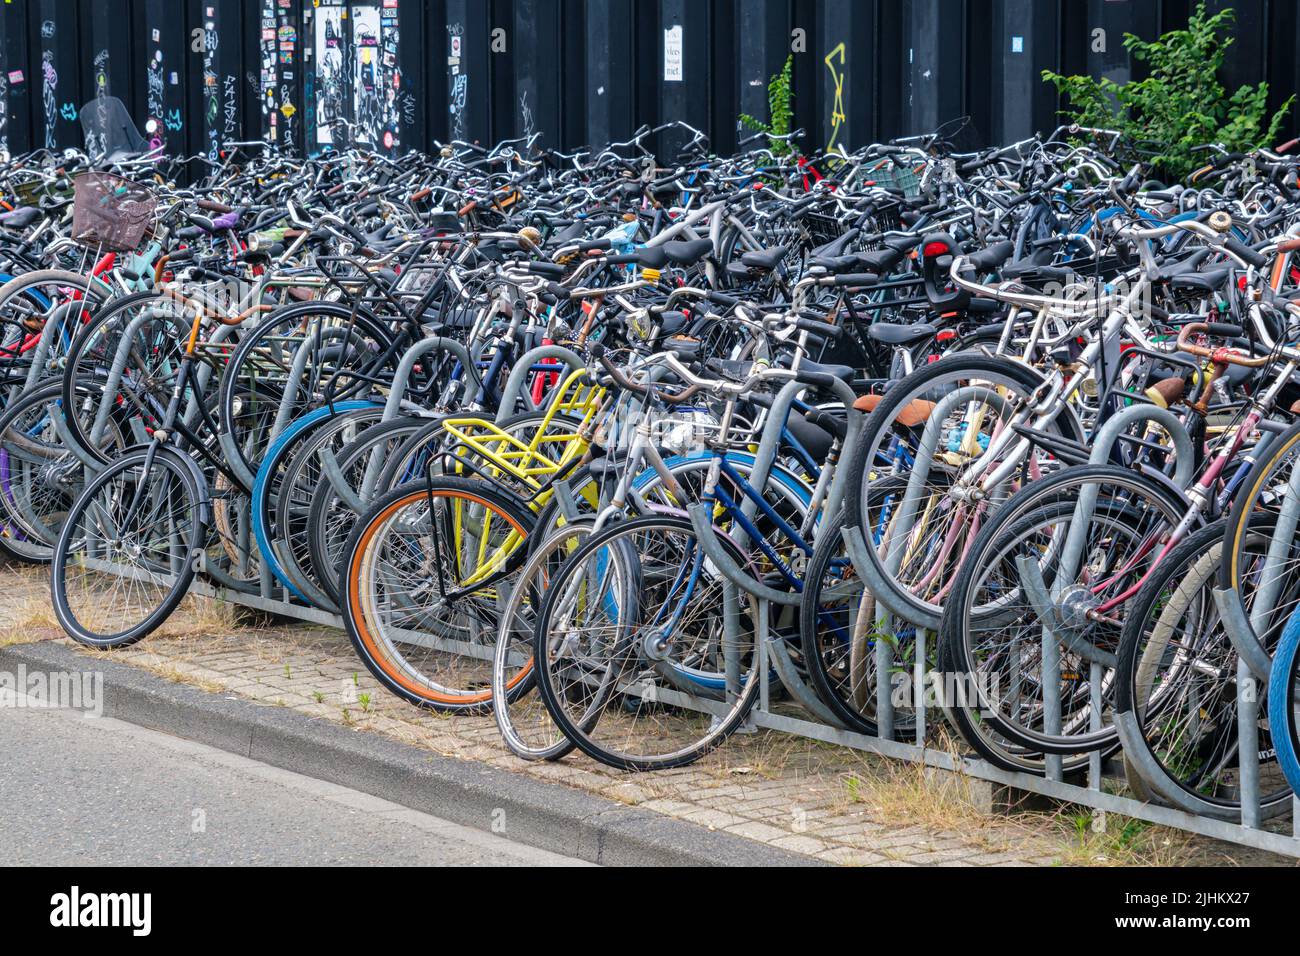 Amsterdam, Netherlands - 21 June 2022: Bicycle Parking Central Station has around 10,000 temporary bike parking spaces Stock Photo